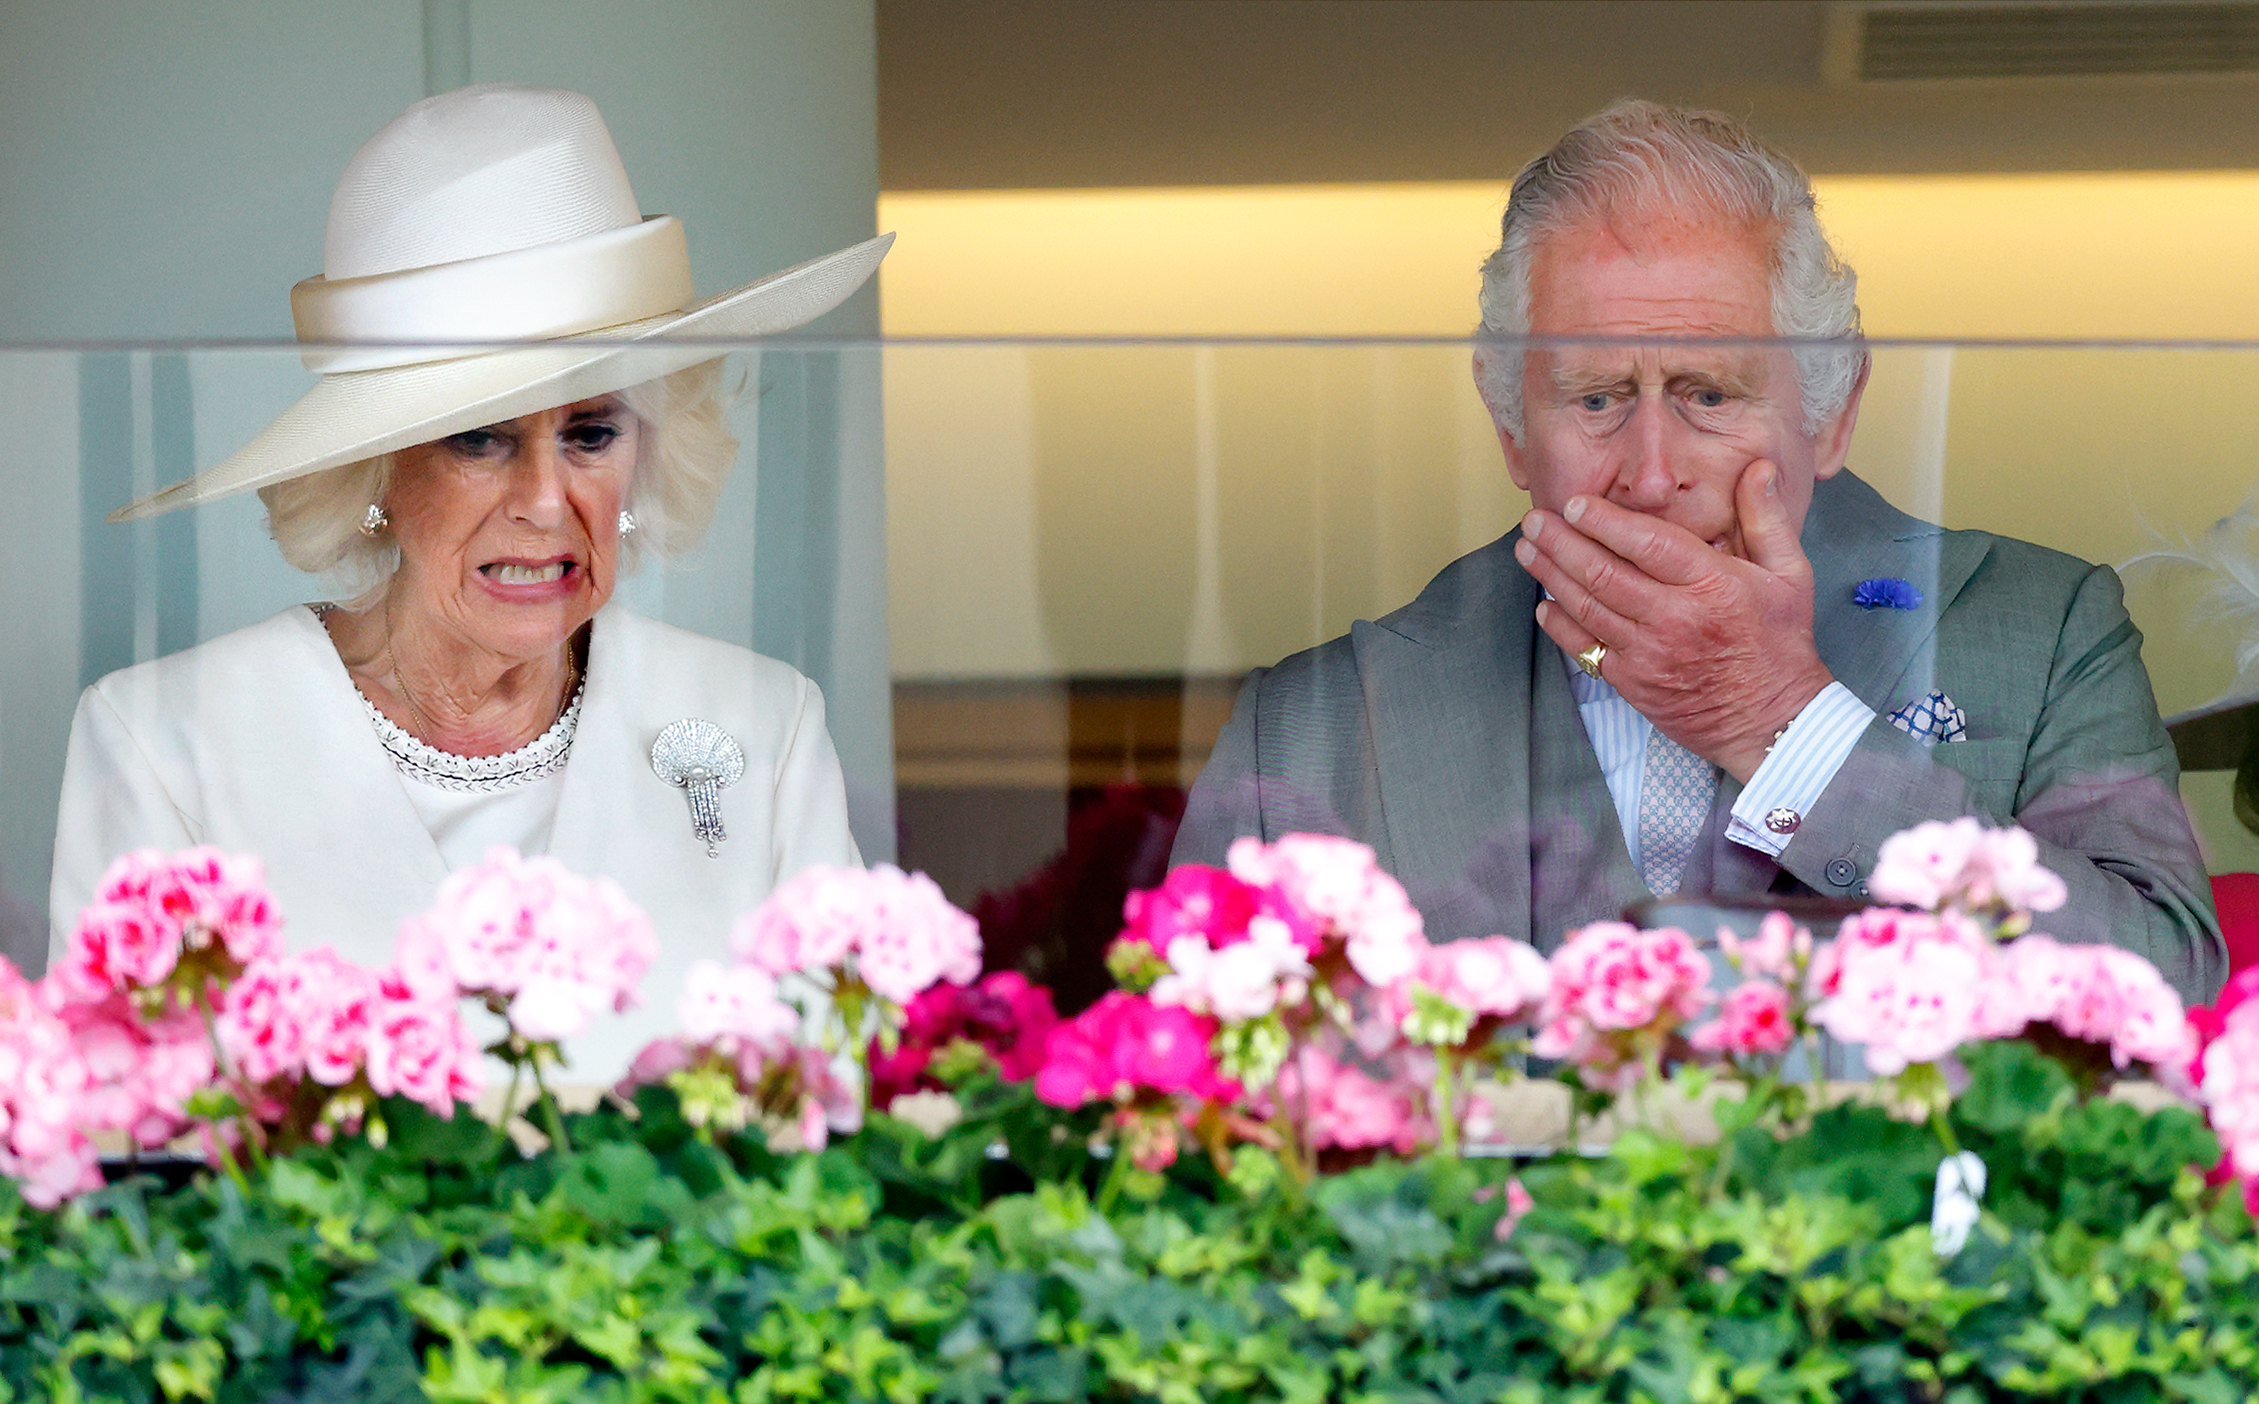 Queen Camilla and King Charles III react as they watch their horse Saga run in one event at Royal Ascot 2023 in England on June 20, 2023. | Source: Getty Images